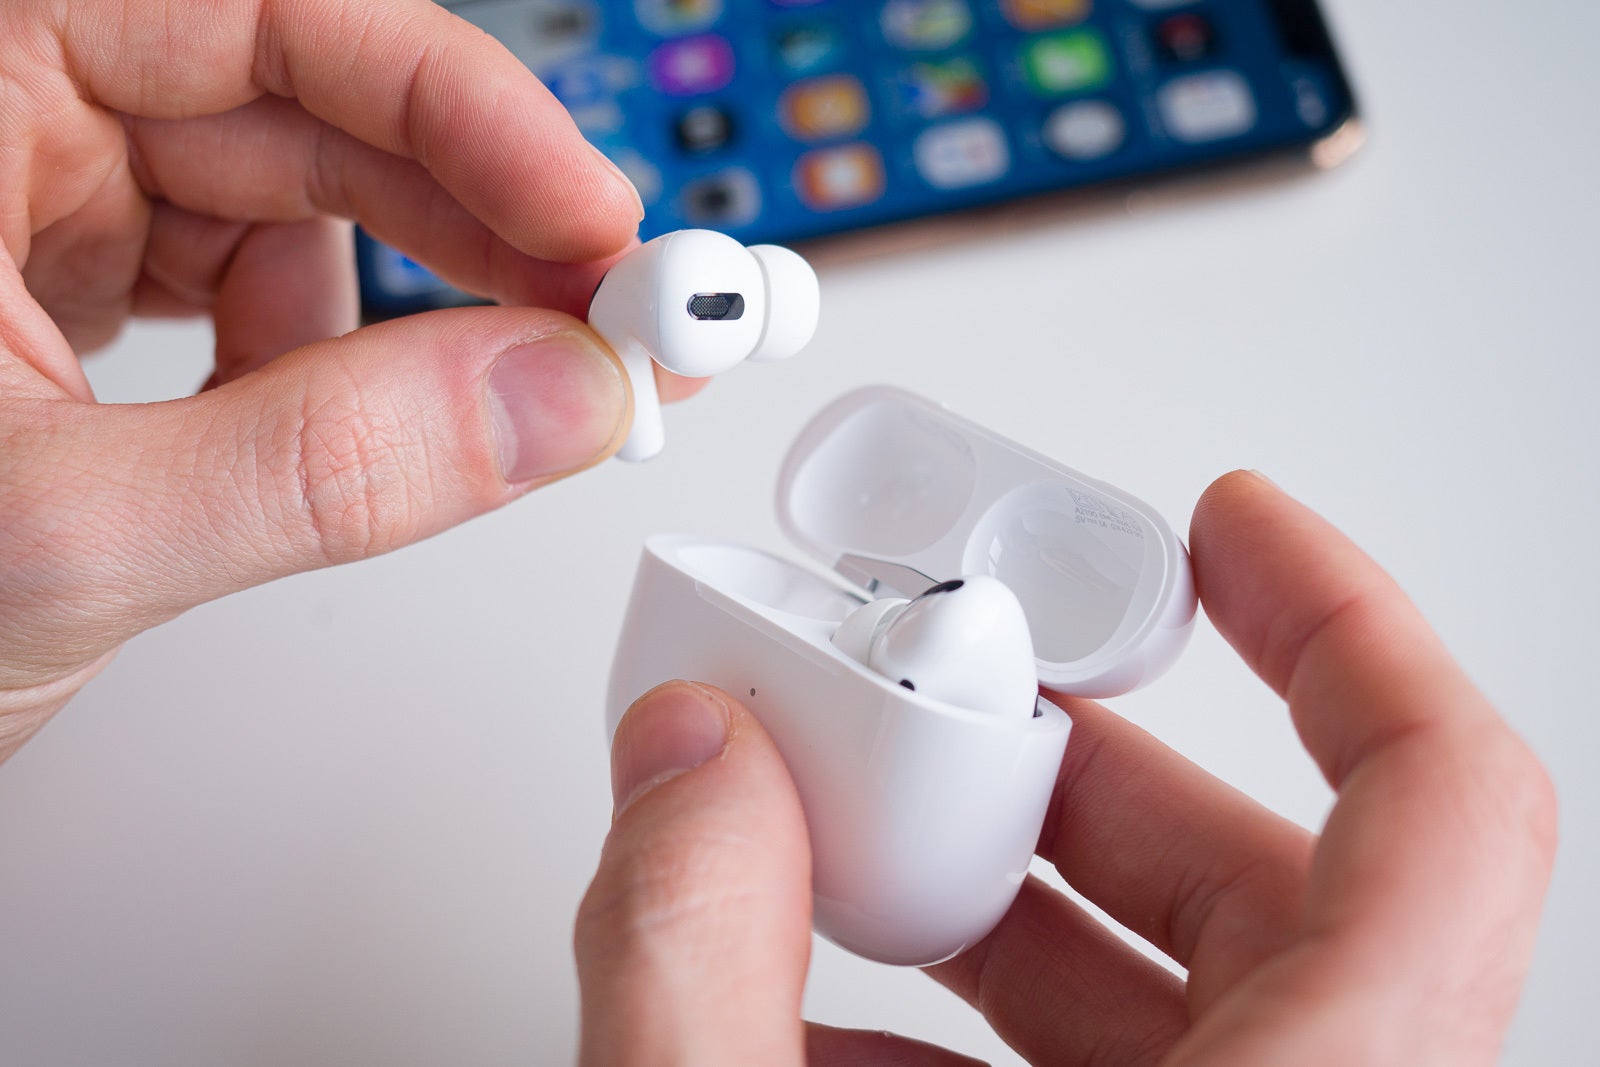 AirPods Pro will inspire the new AirPods design&quot;&amp;nbsp - Apple to launch redesigned AirPods 3 &amp; AirPods Pro 2 in 2021, new HomePod too